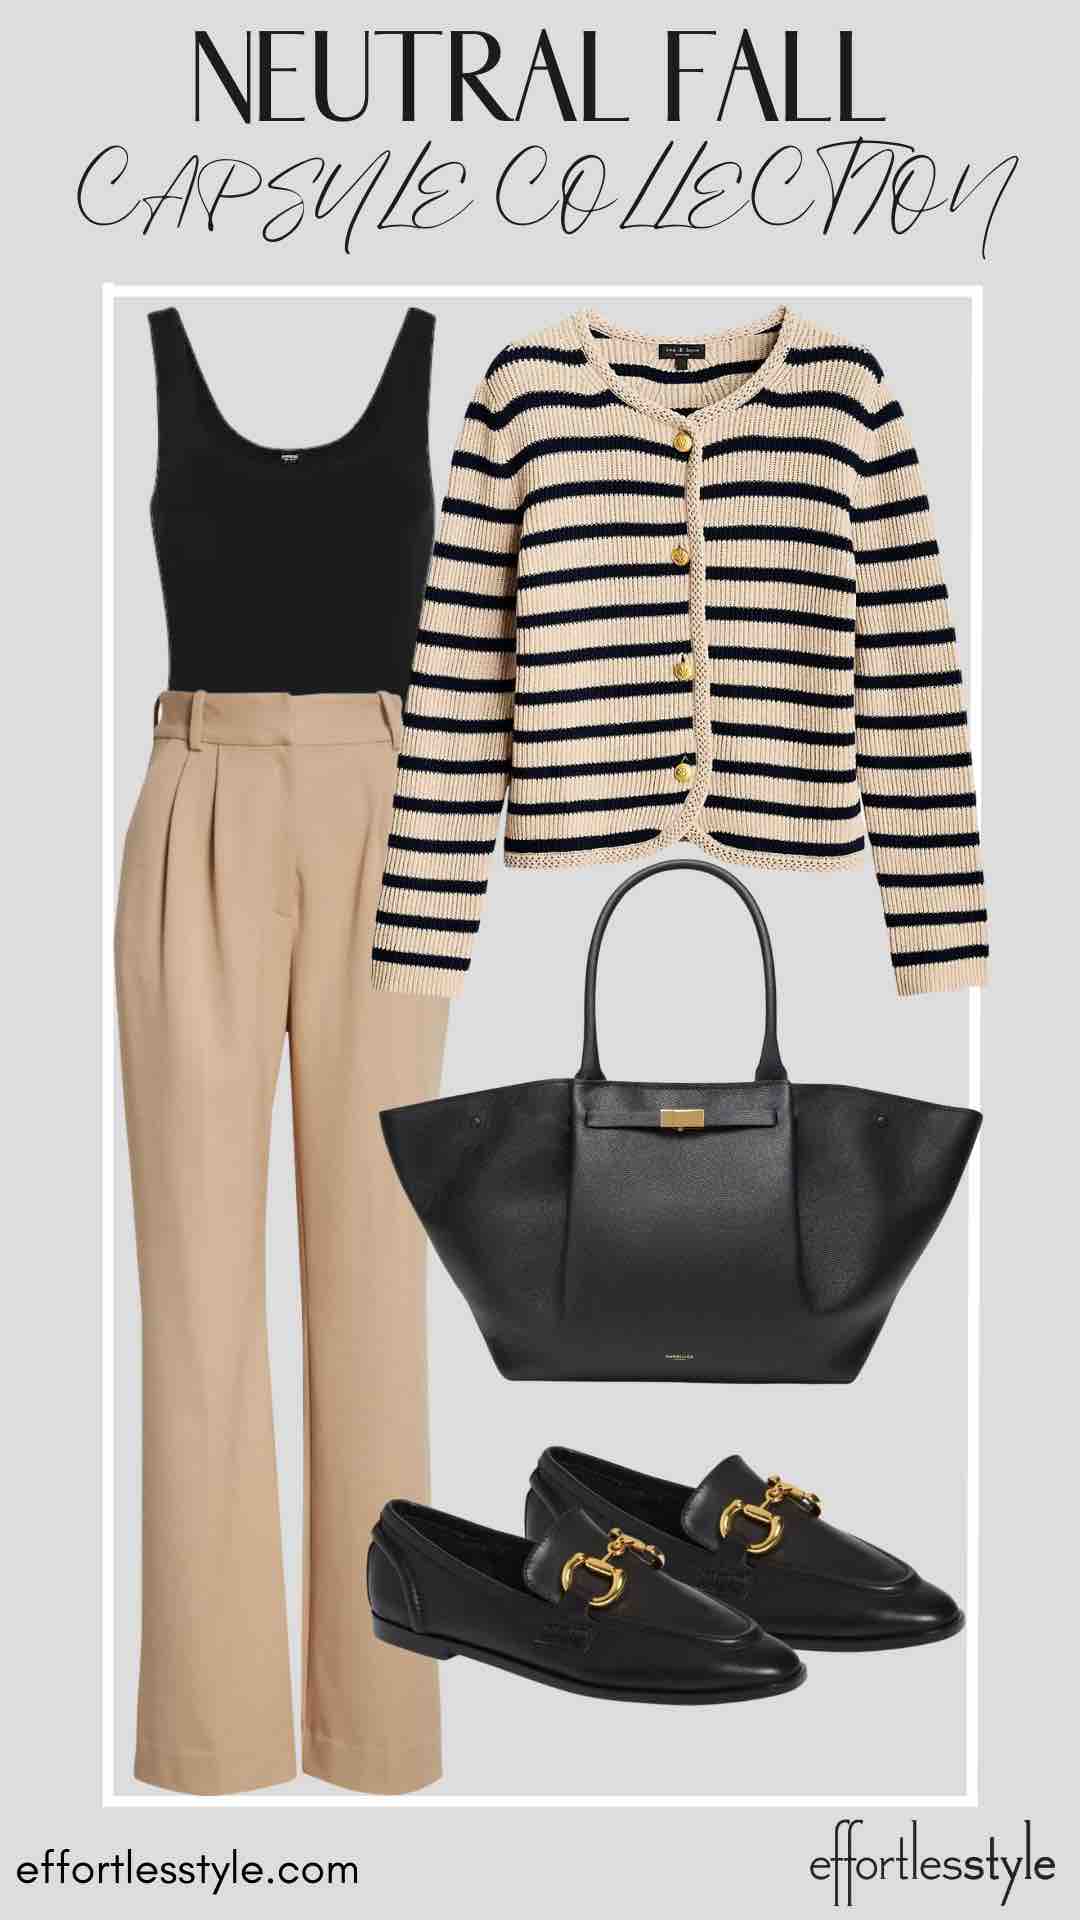 How To Wear Our Neutral Fall Capsule Wardrobe - Part 2 Striped Cardigan & Trousers the trouser trend how to wear trousers workwear style inspiration personal stylists share fun fall looks Nashville stylists share fall looks for the office what to wear to the office how to style trousers for the office how to style stripes for work